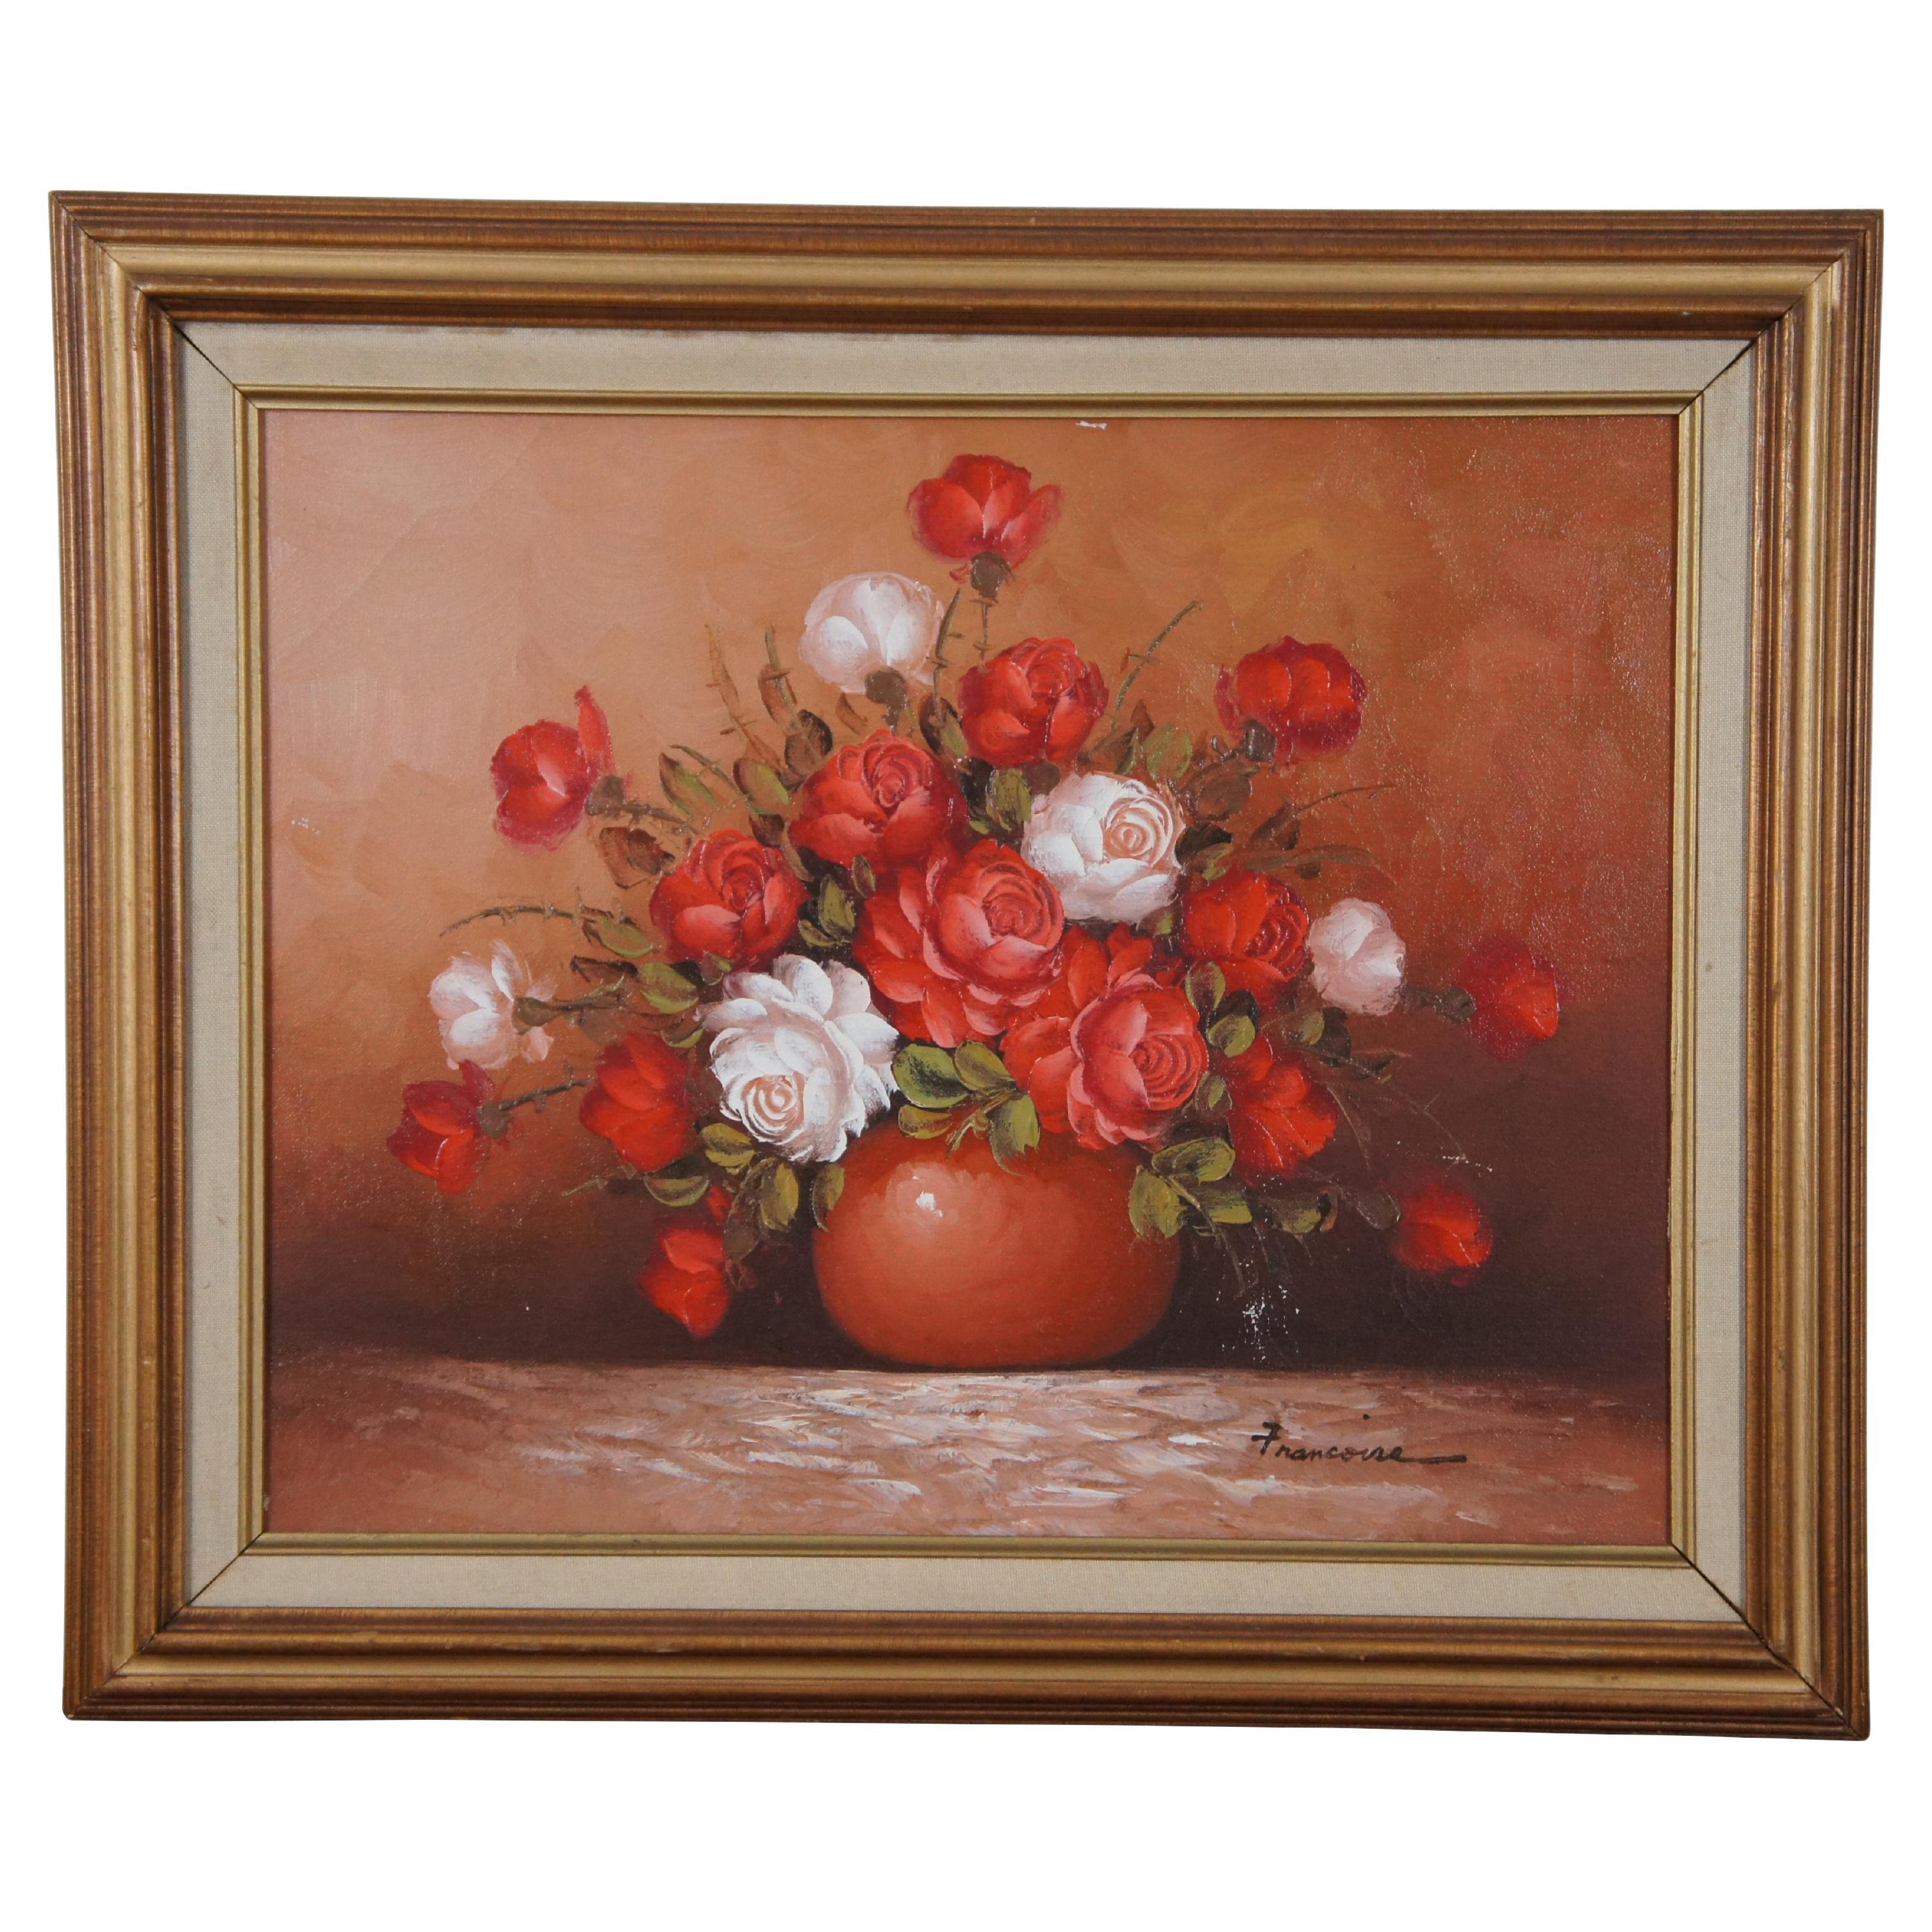 Vintage Francoise Red & White Roses Still Life Oil Painting on Canvas 25" For Sale